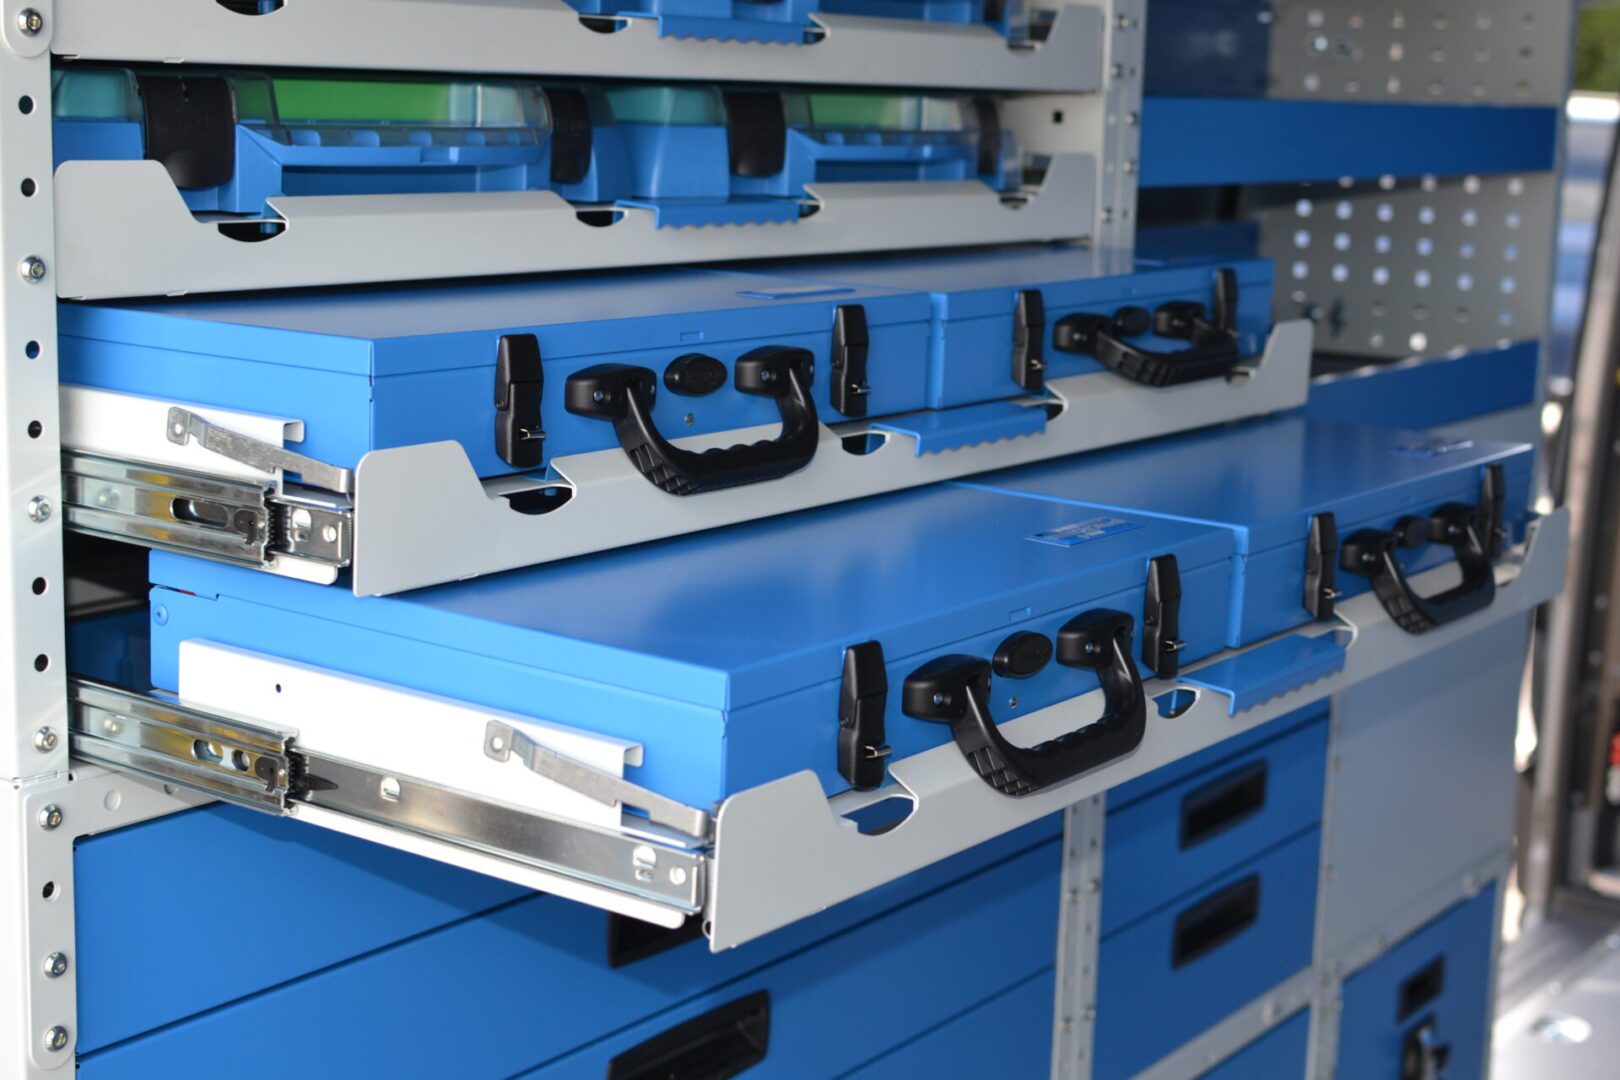 MAN van racking system view of tool cases on slide out shelving